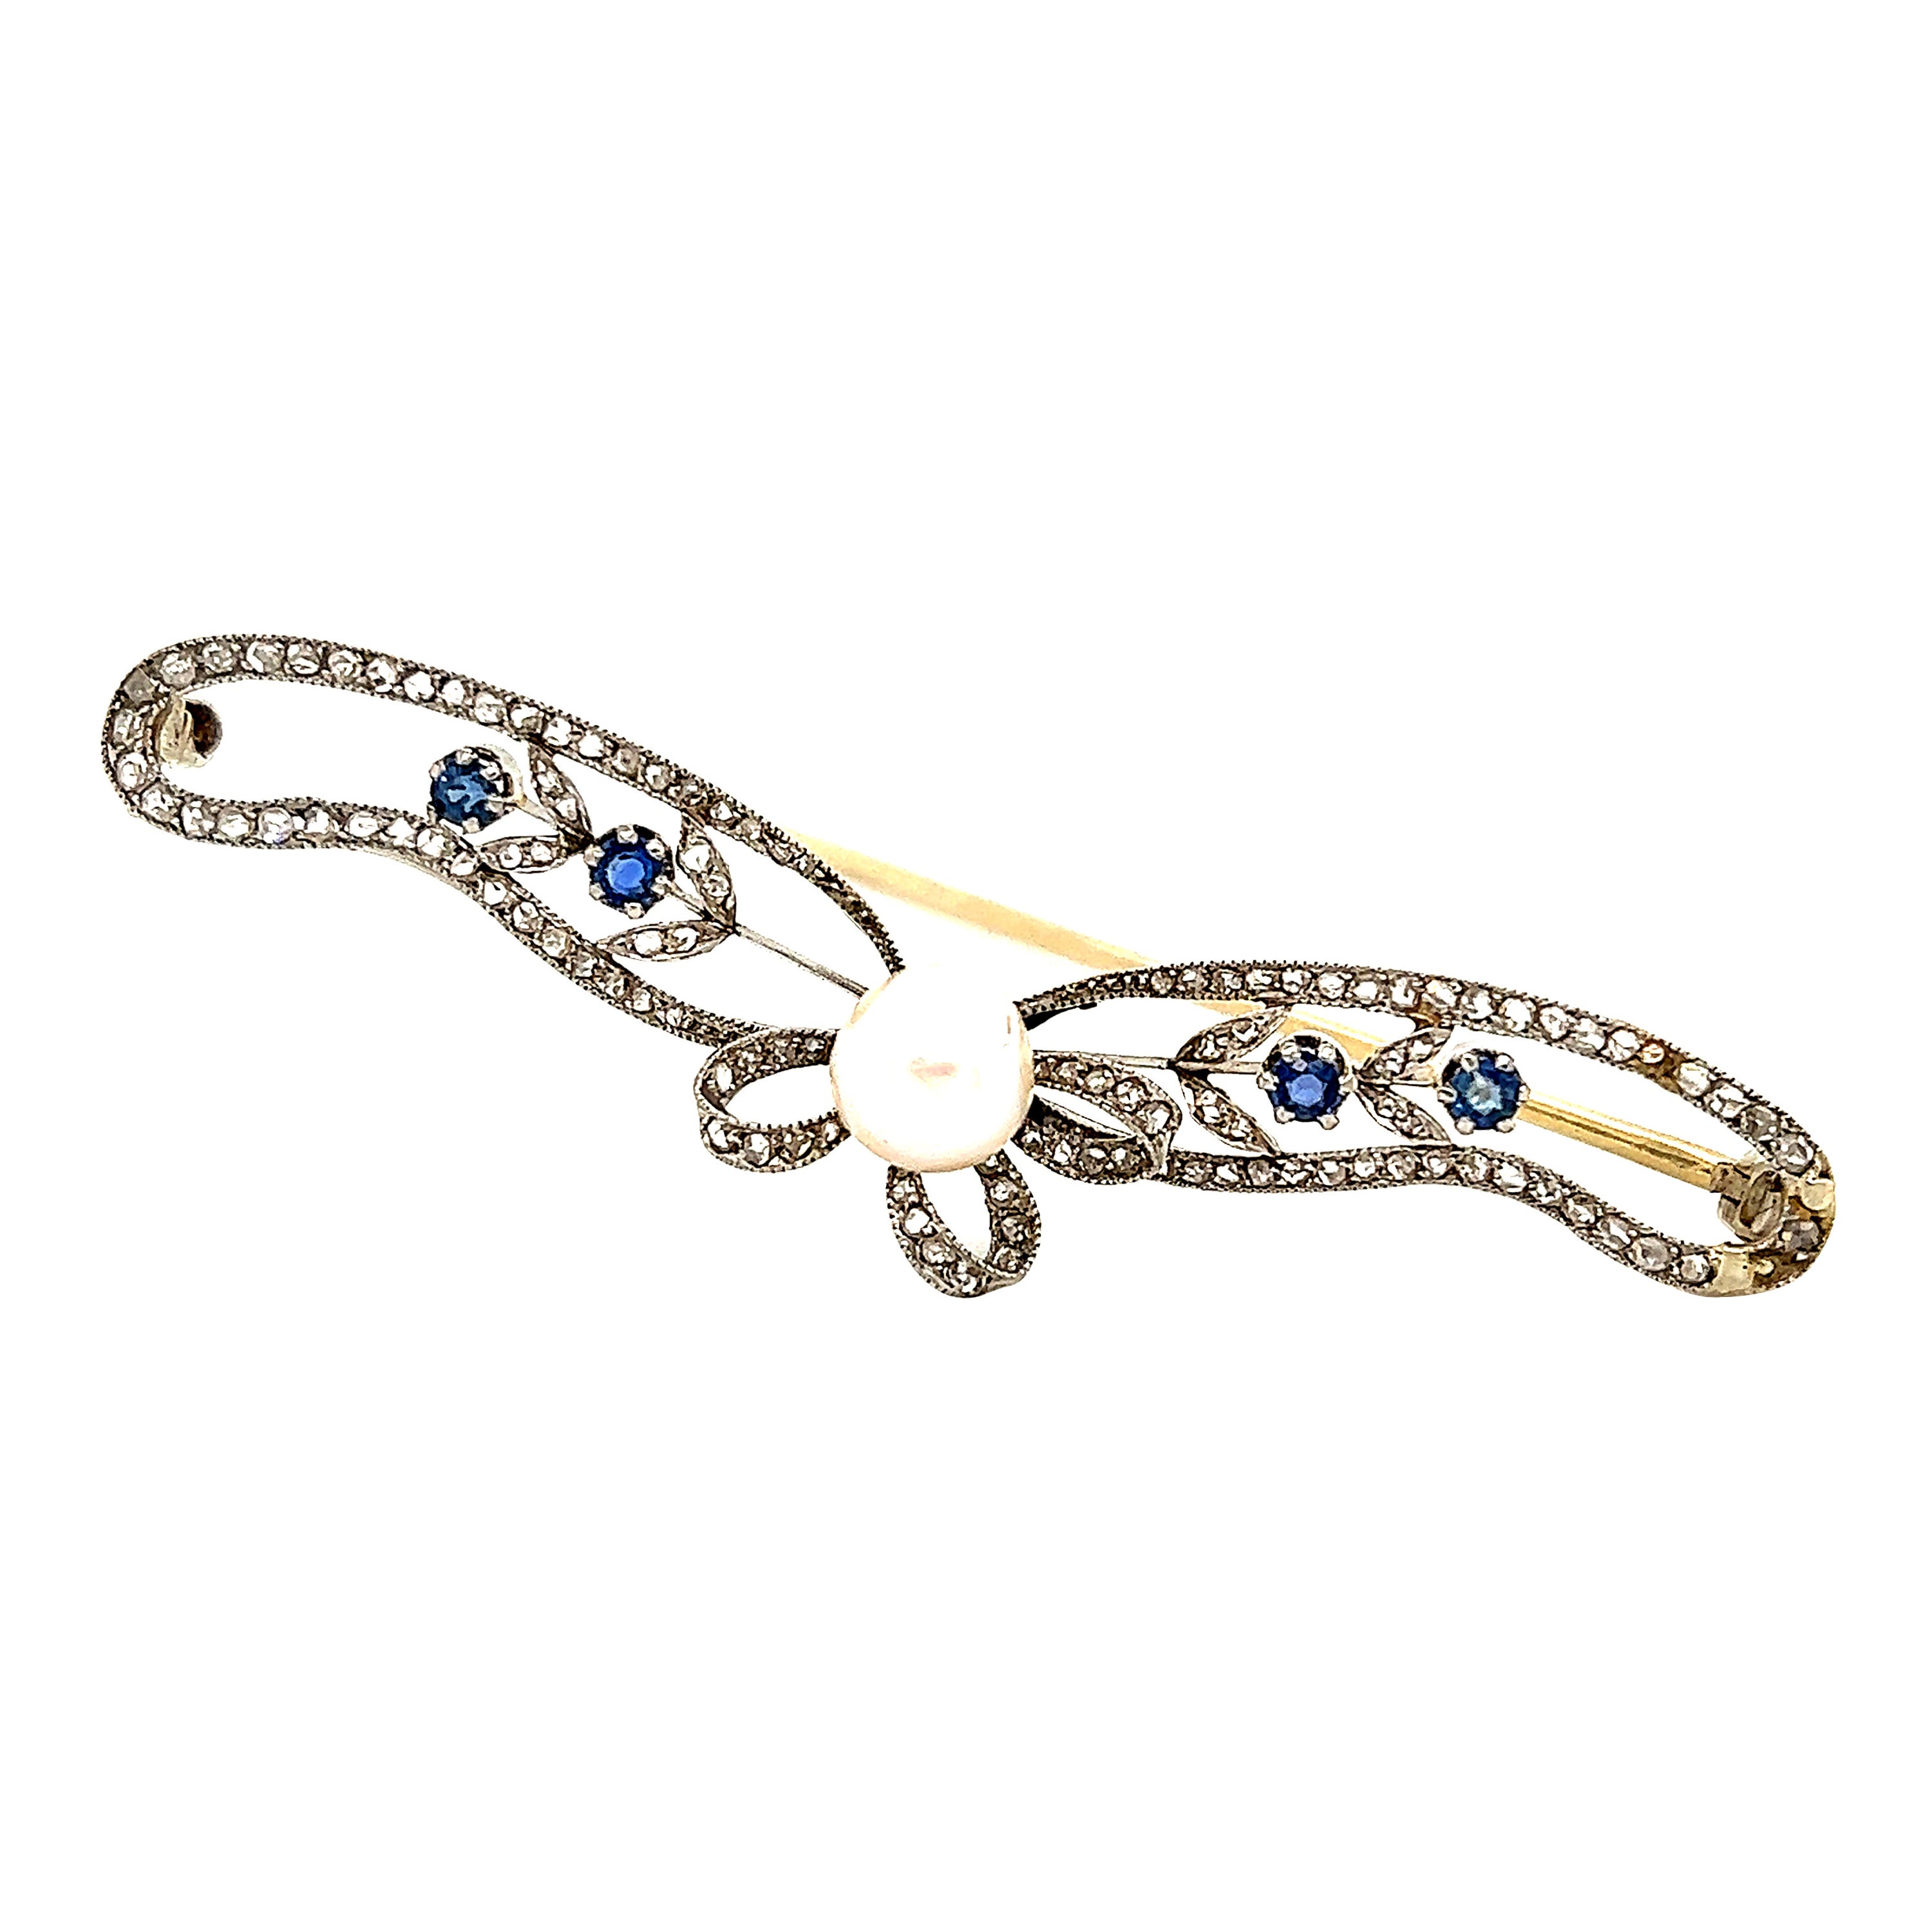 Belle Epoque Platinum Ribbon Brooch with Pearl Diamonds & Sapphires